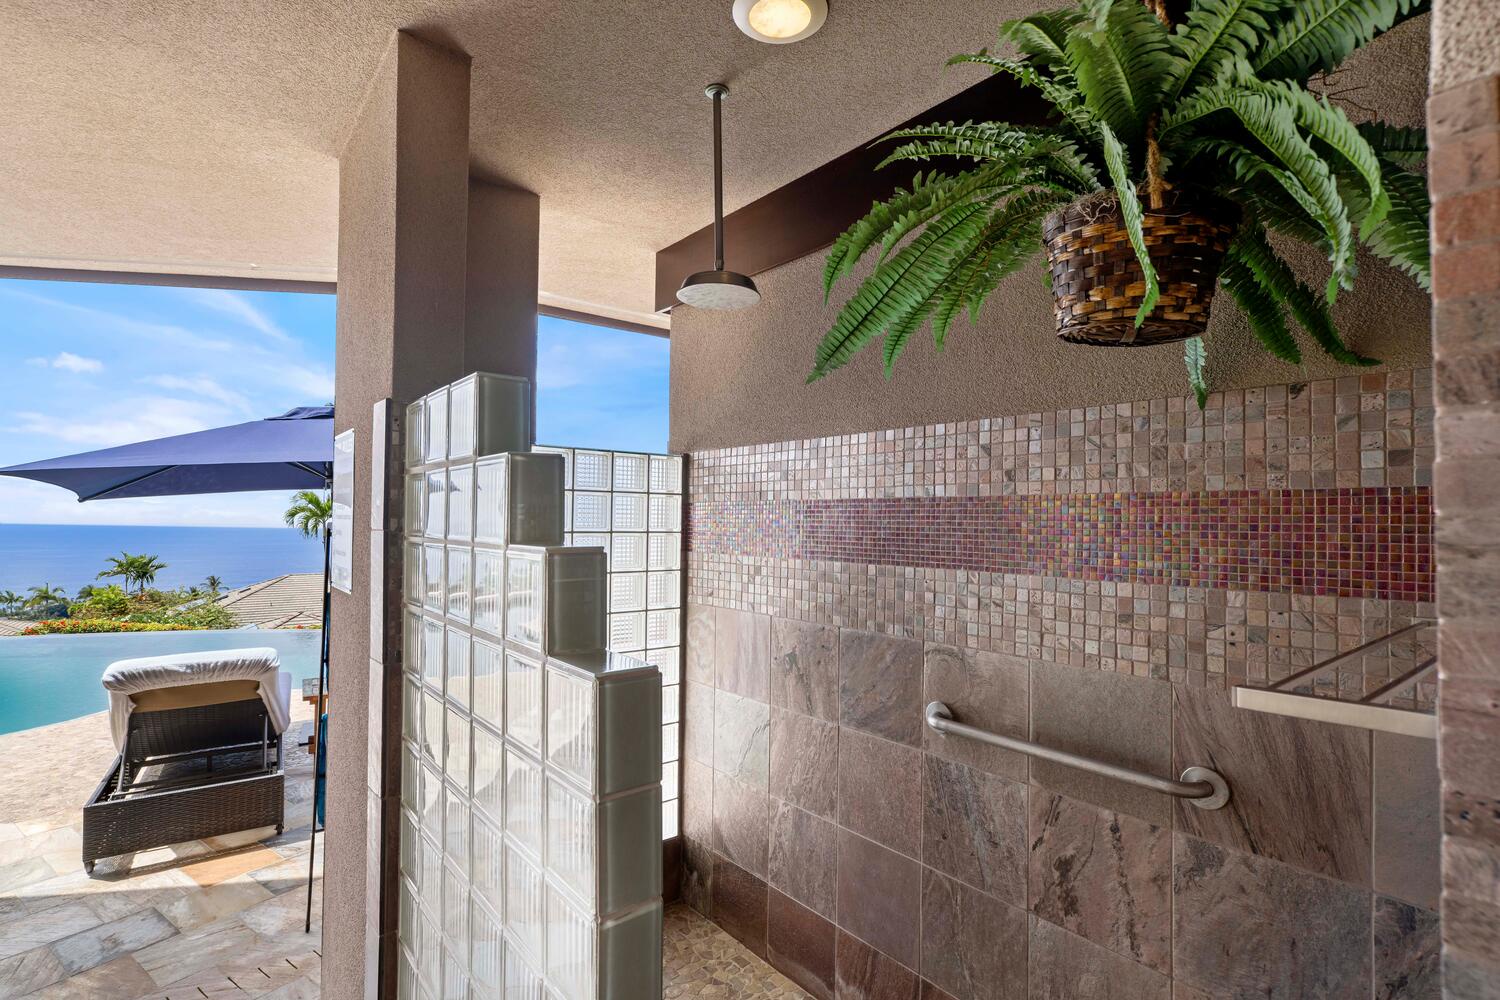 Kailua Kona Vacation Rentals, Island Oasis - Outdoor shower for after the beach!